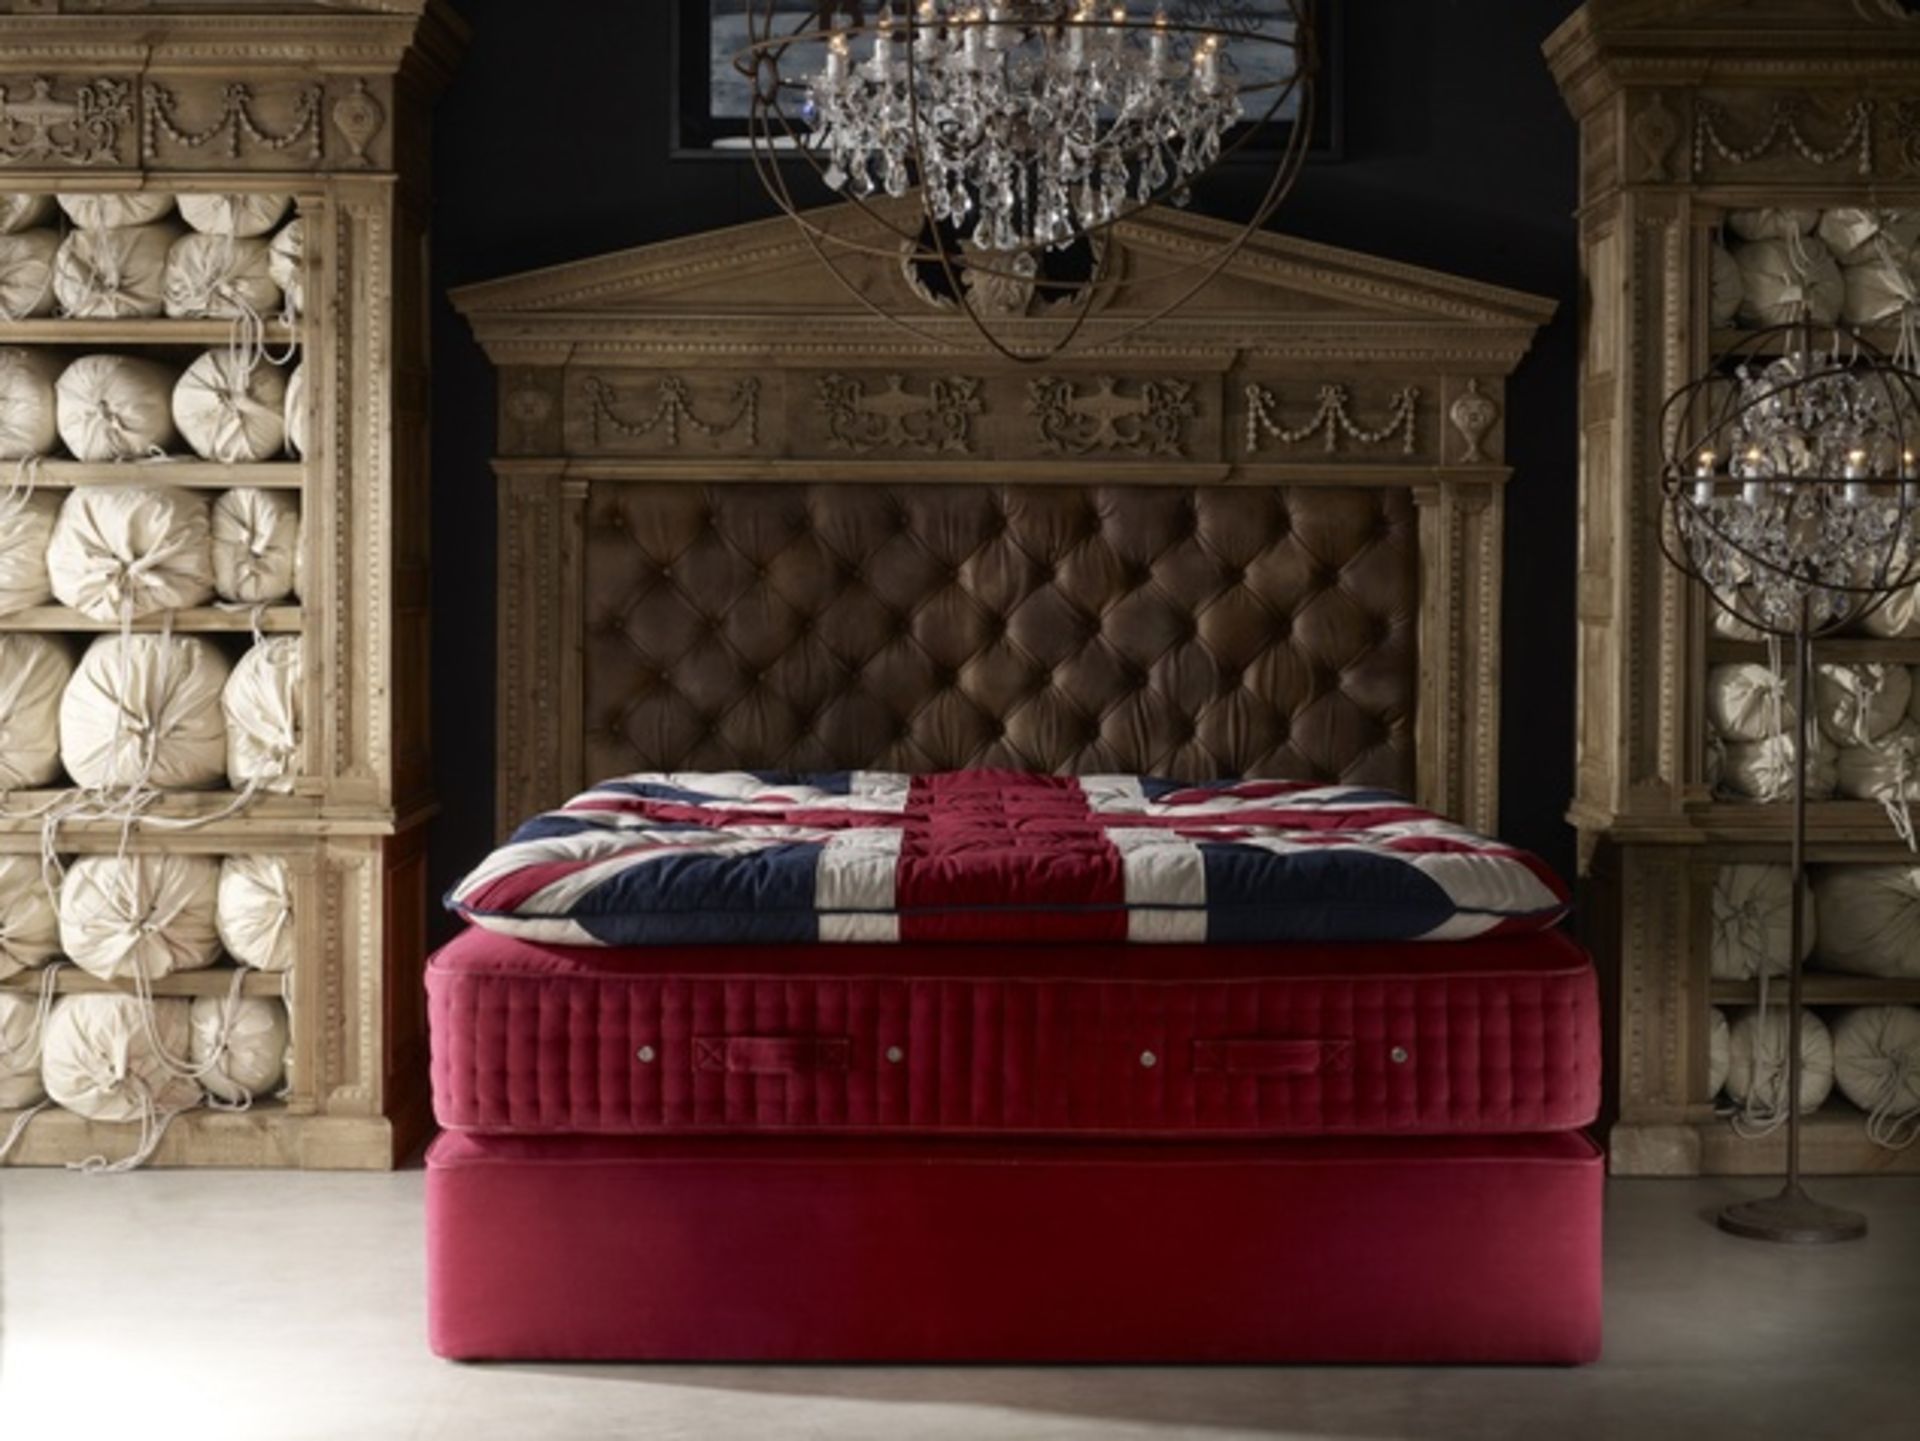 The Brigadier Divan The Most Popular Bed Of The Perpetual Collection The Brigadier Is Designed For